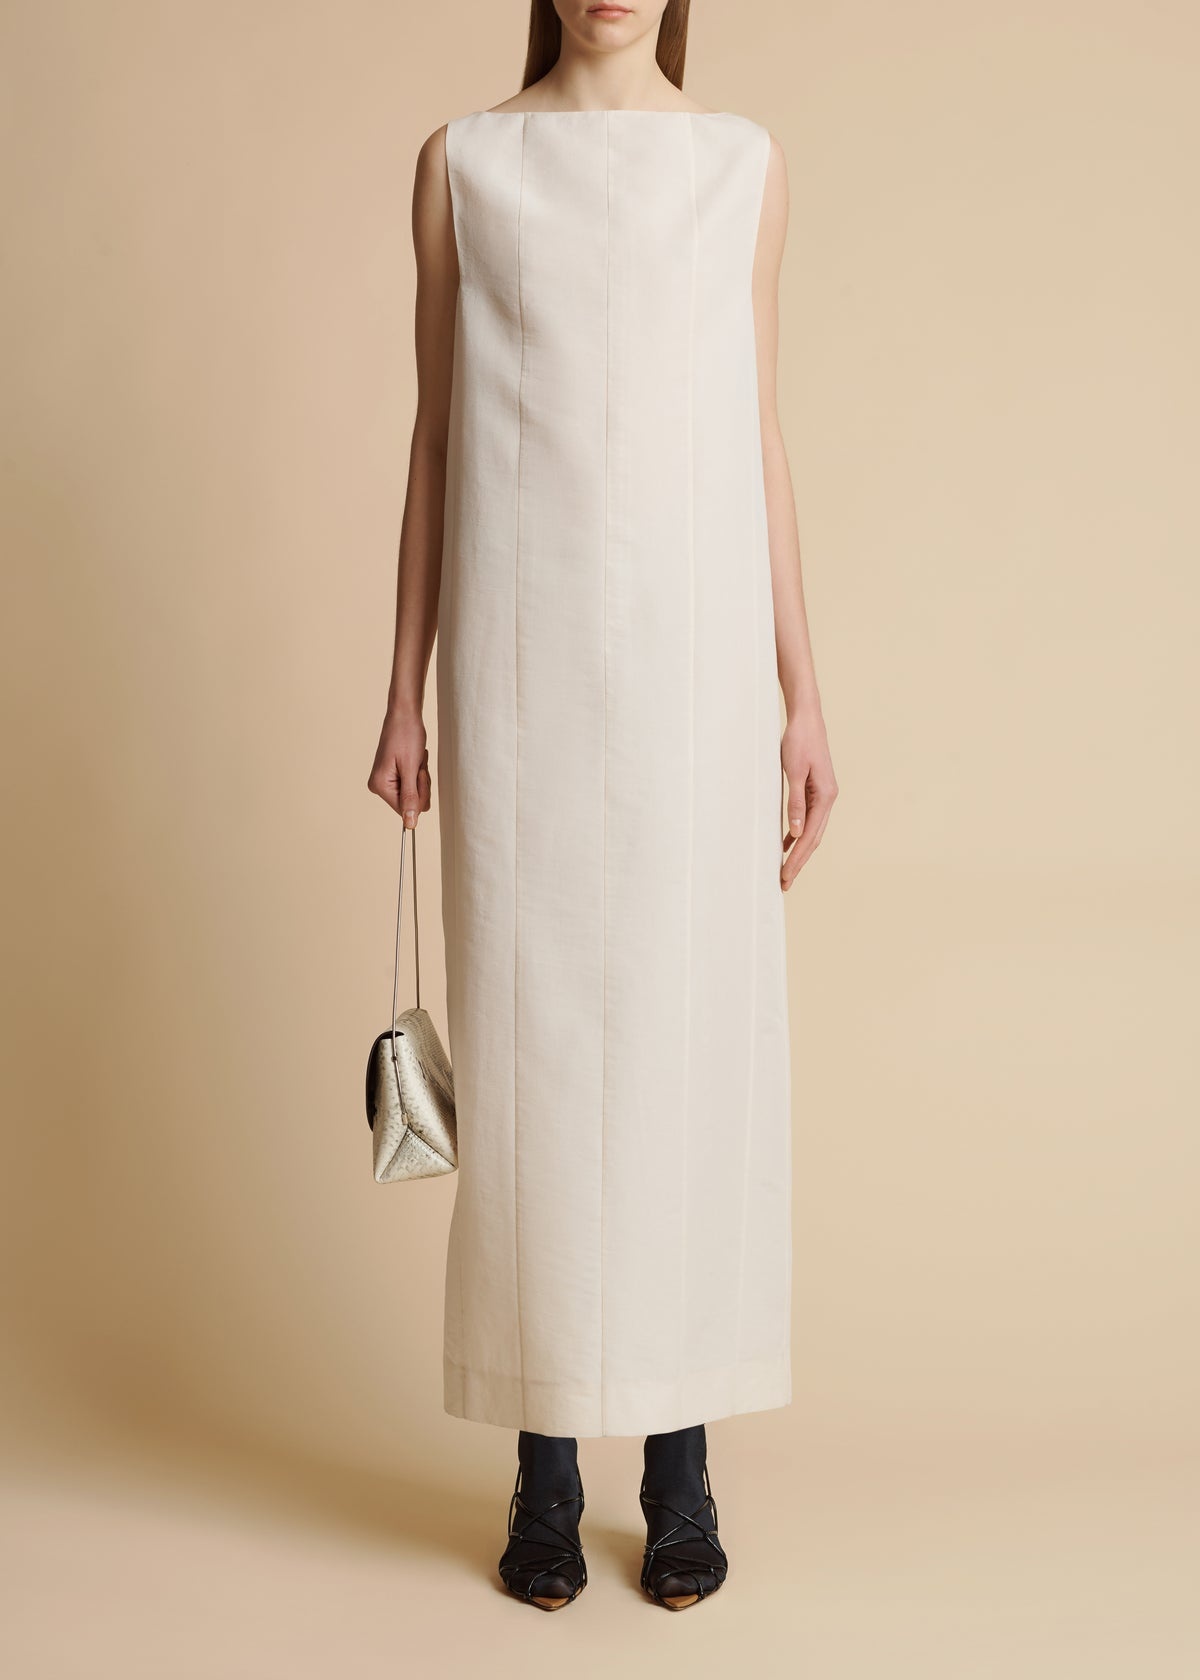 The Martay Dress in Natural - 1